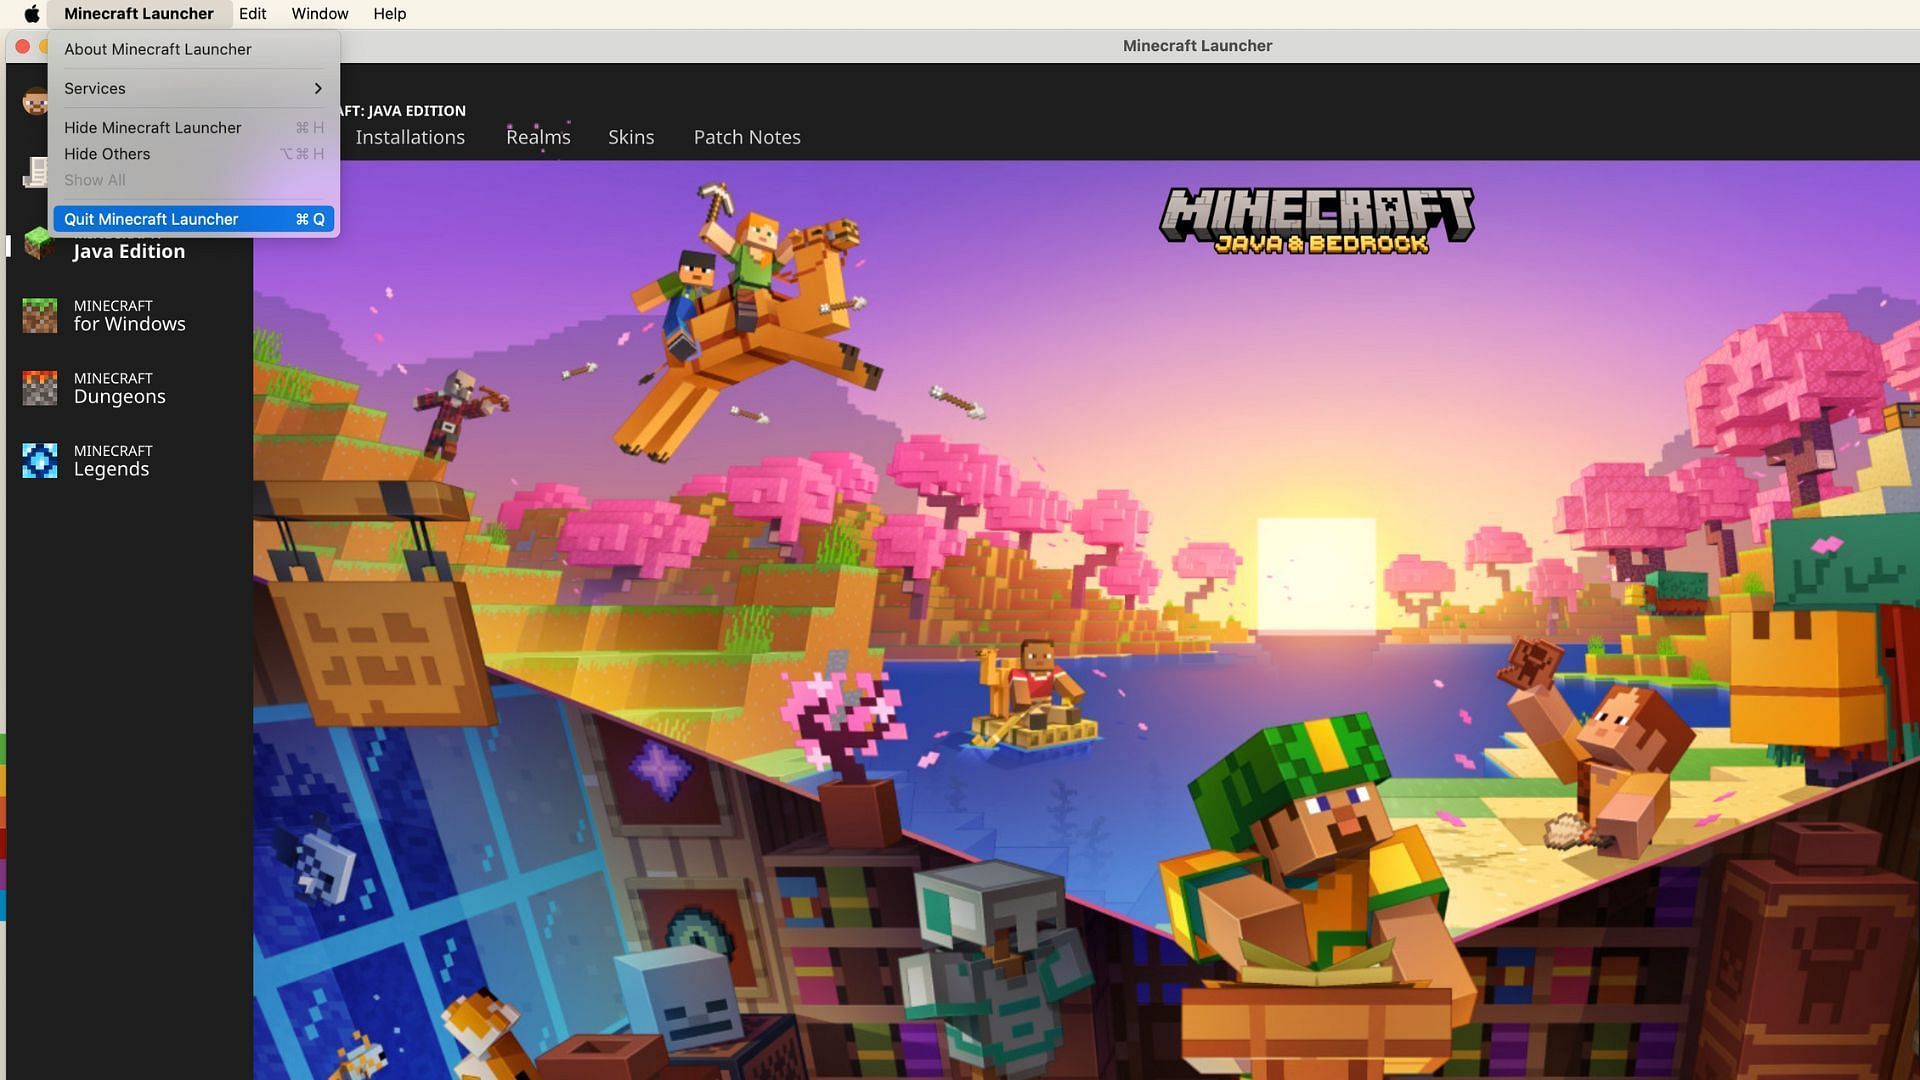 Quit the Launcher and start it again to fix the error (Image via Mojang Studios)